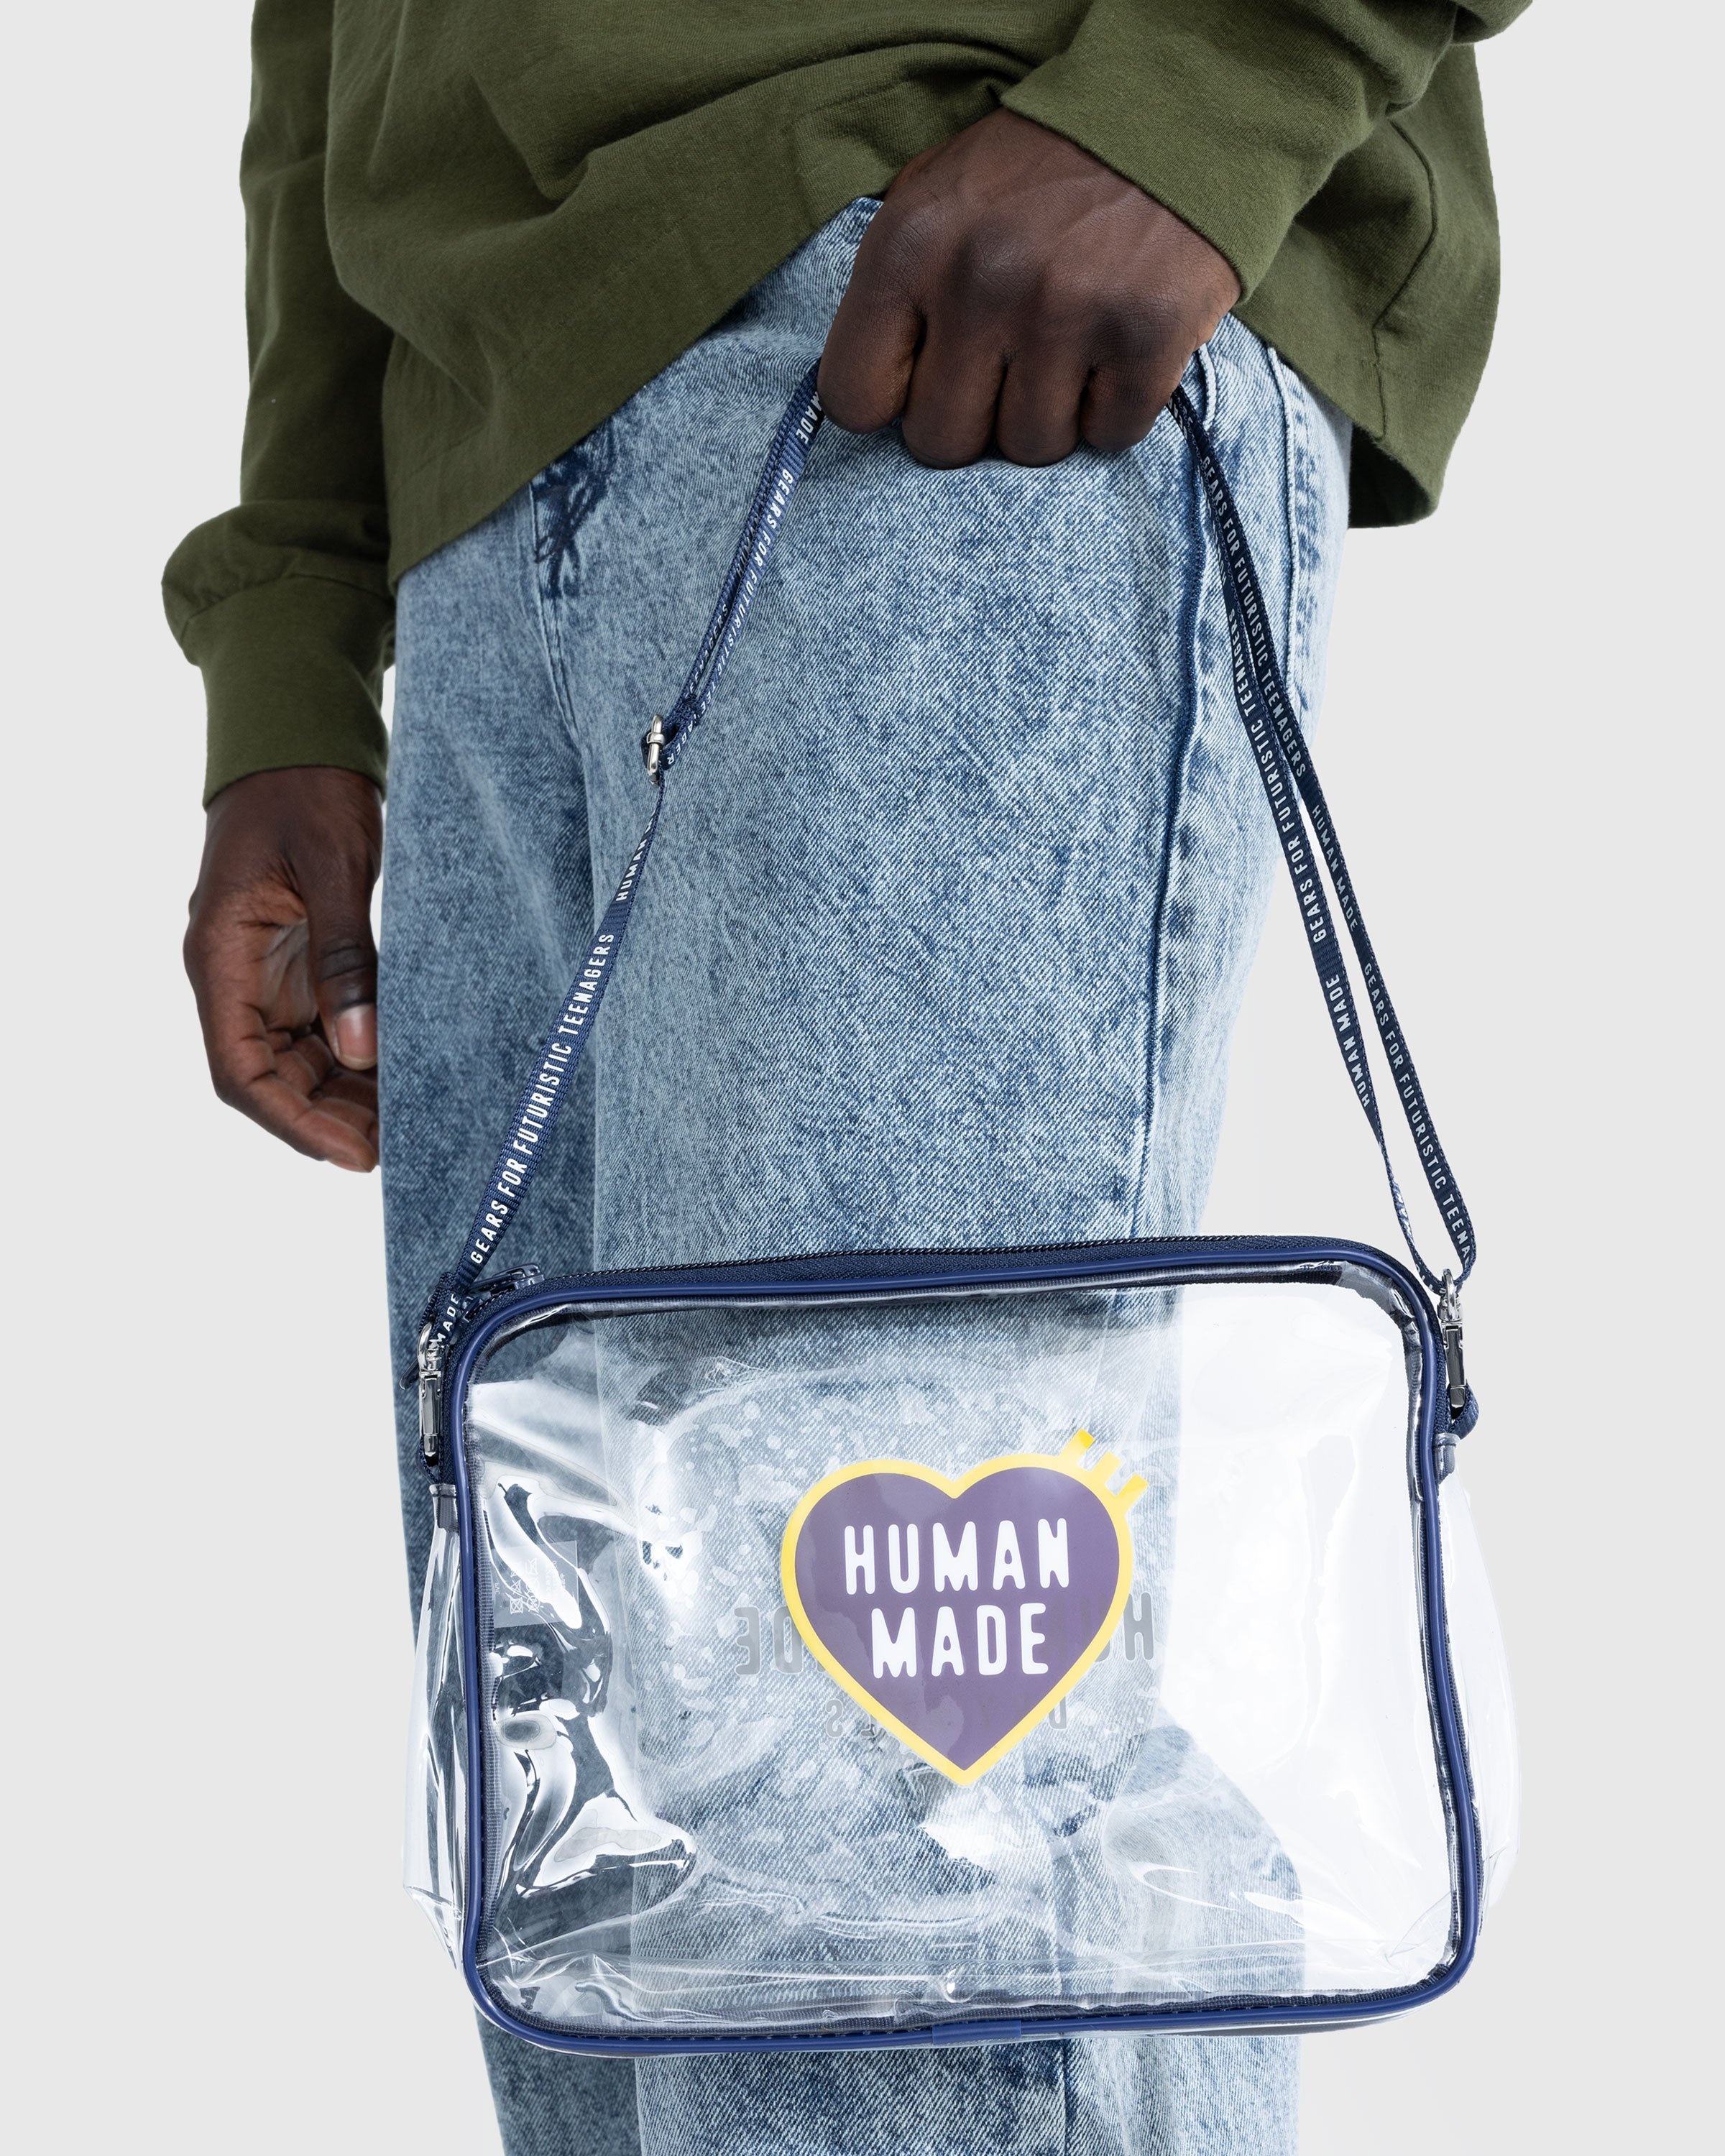 Human Made – PVC POUCH LARGE Navy | Highsnobiety Shop